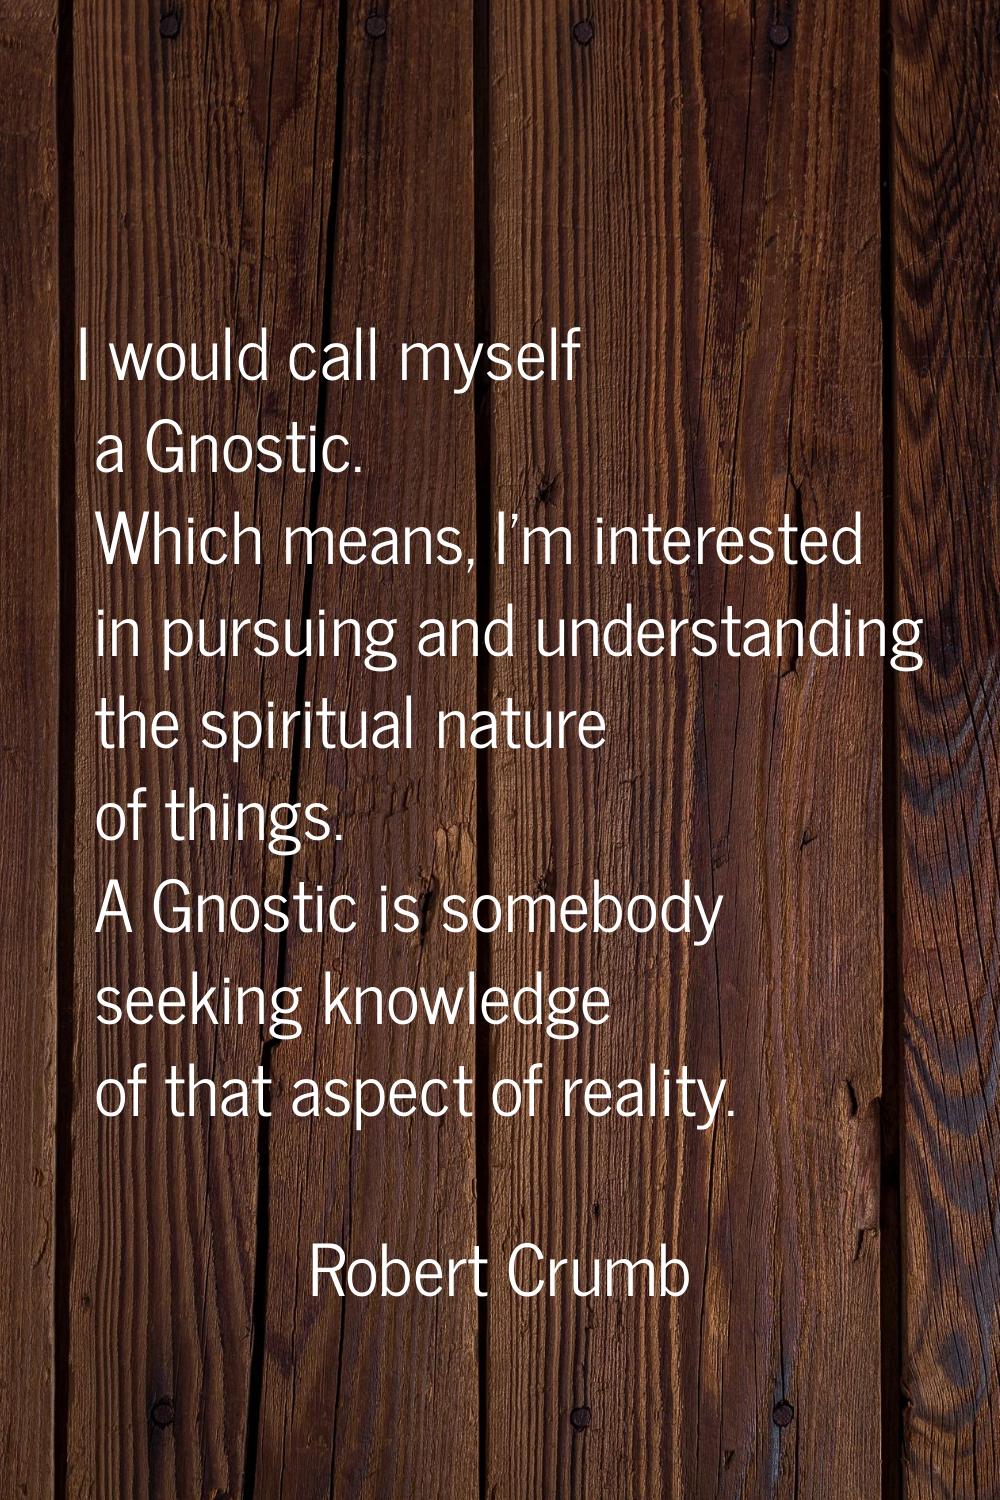 I would call myself a Gnostic. Which means, I'm interested in pursuing and understanding the spirit